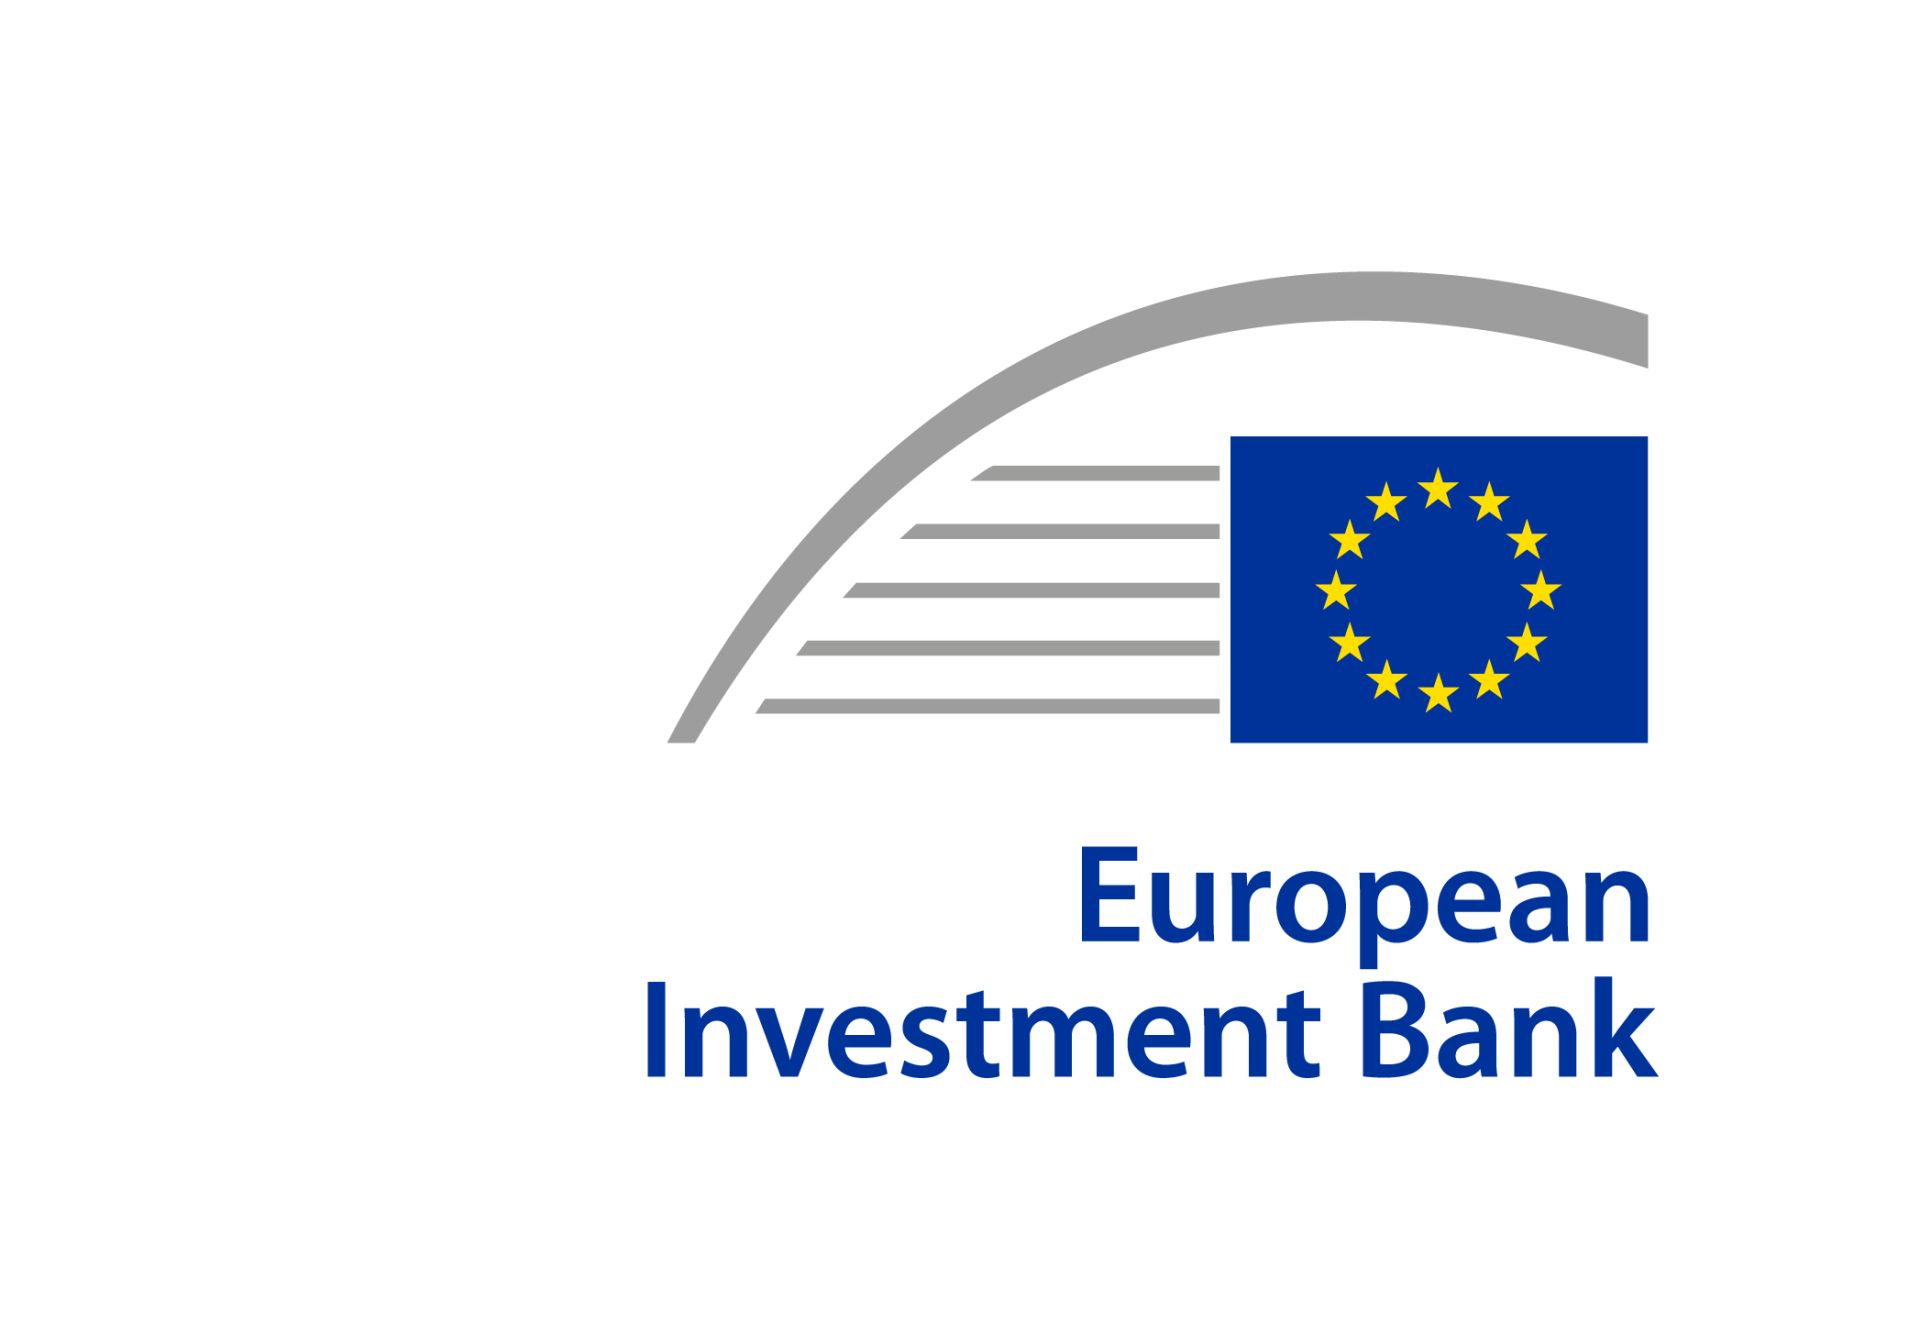 Exeger receives first payout of the €35 million EIB loan after securing €20 million equity financing